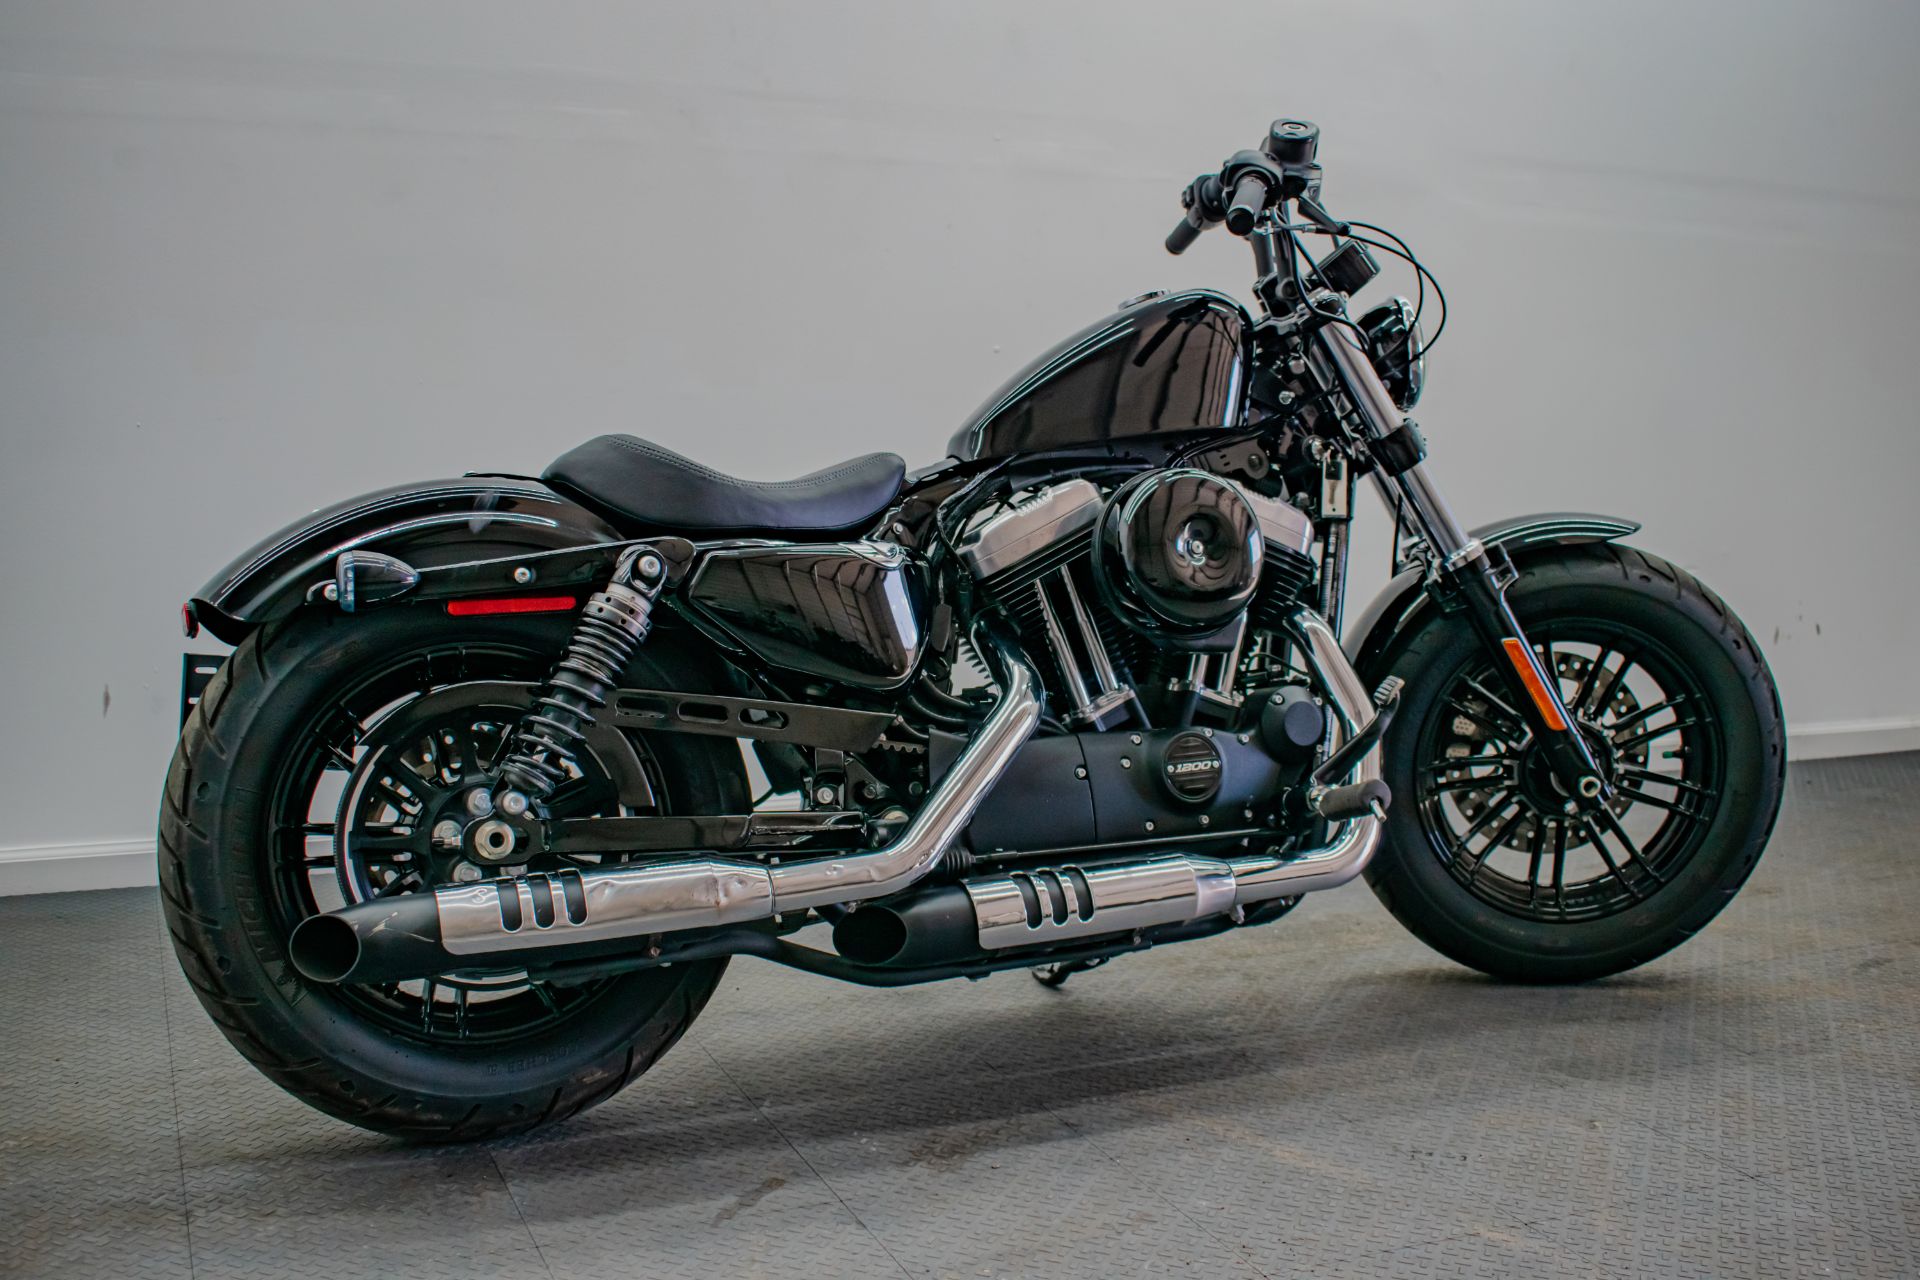 2022 Harley-Davidson Forty-Eight® in Jacksonville, Florida - Photo 3